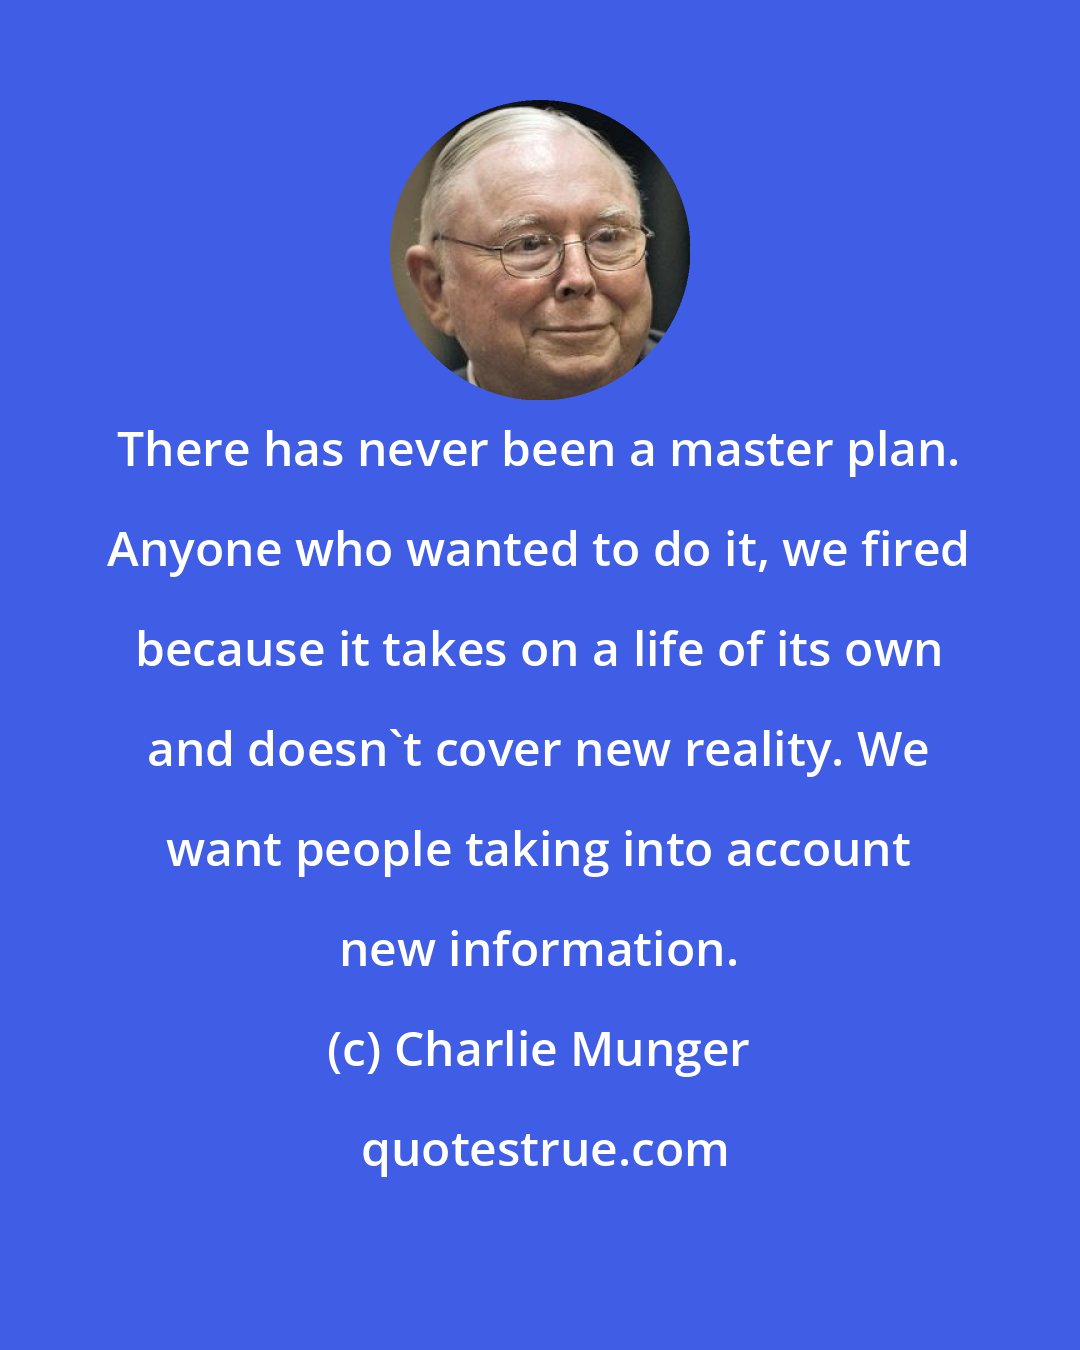 Charlie Munger: There has never been a master plan. Anyone who wanted to do it, we fired because it takes on a life of its own and doesn't cover new reality. We want people taking into account new information.